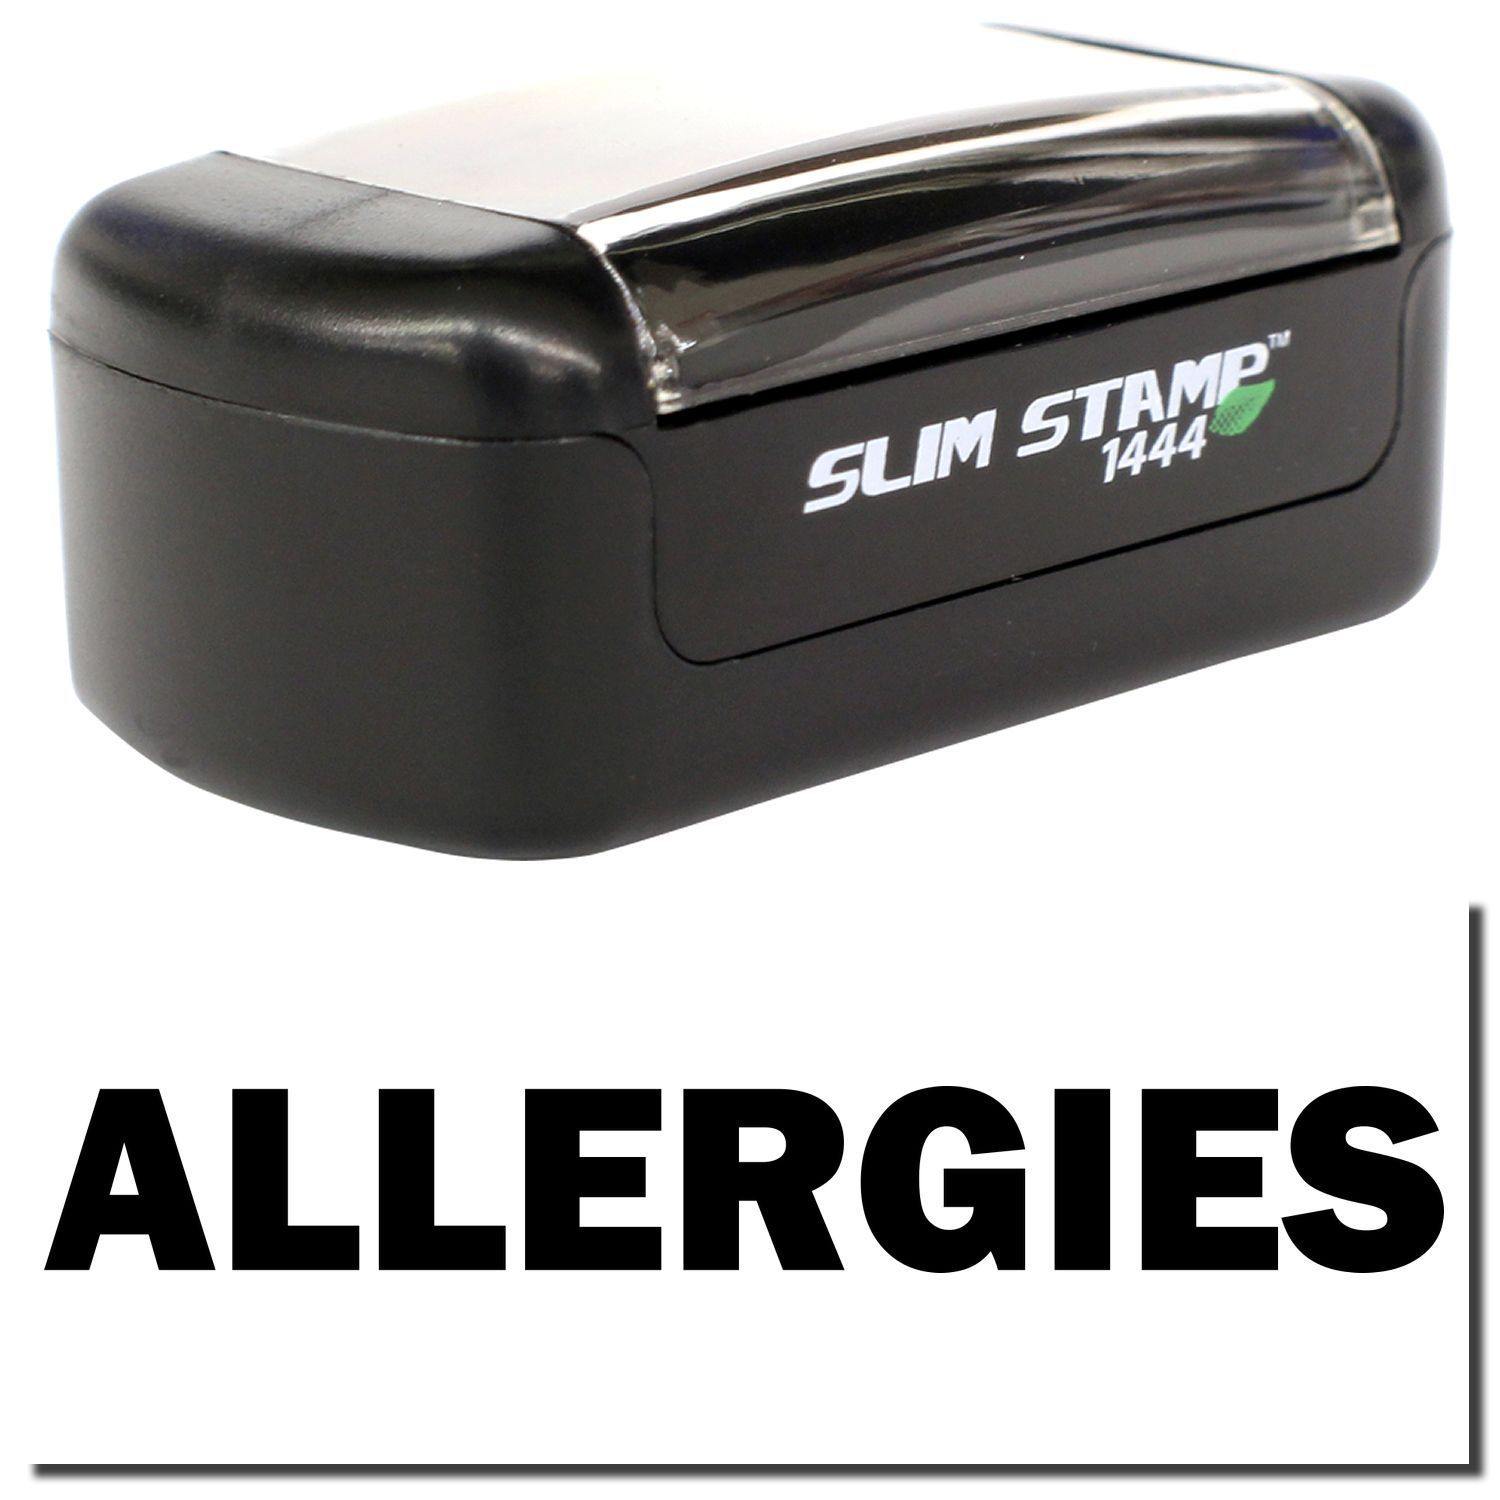 A stock office pre-inked stamp with a stamped image showing how the text "ALLERGIES" in bold font is displayed after stamping.